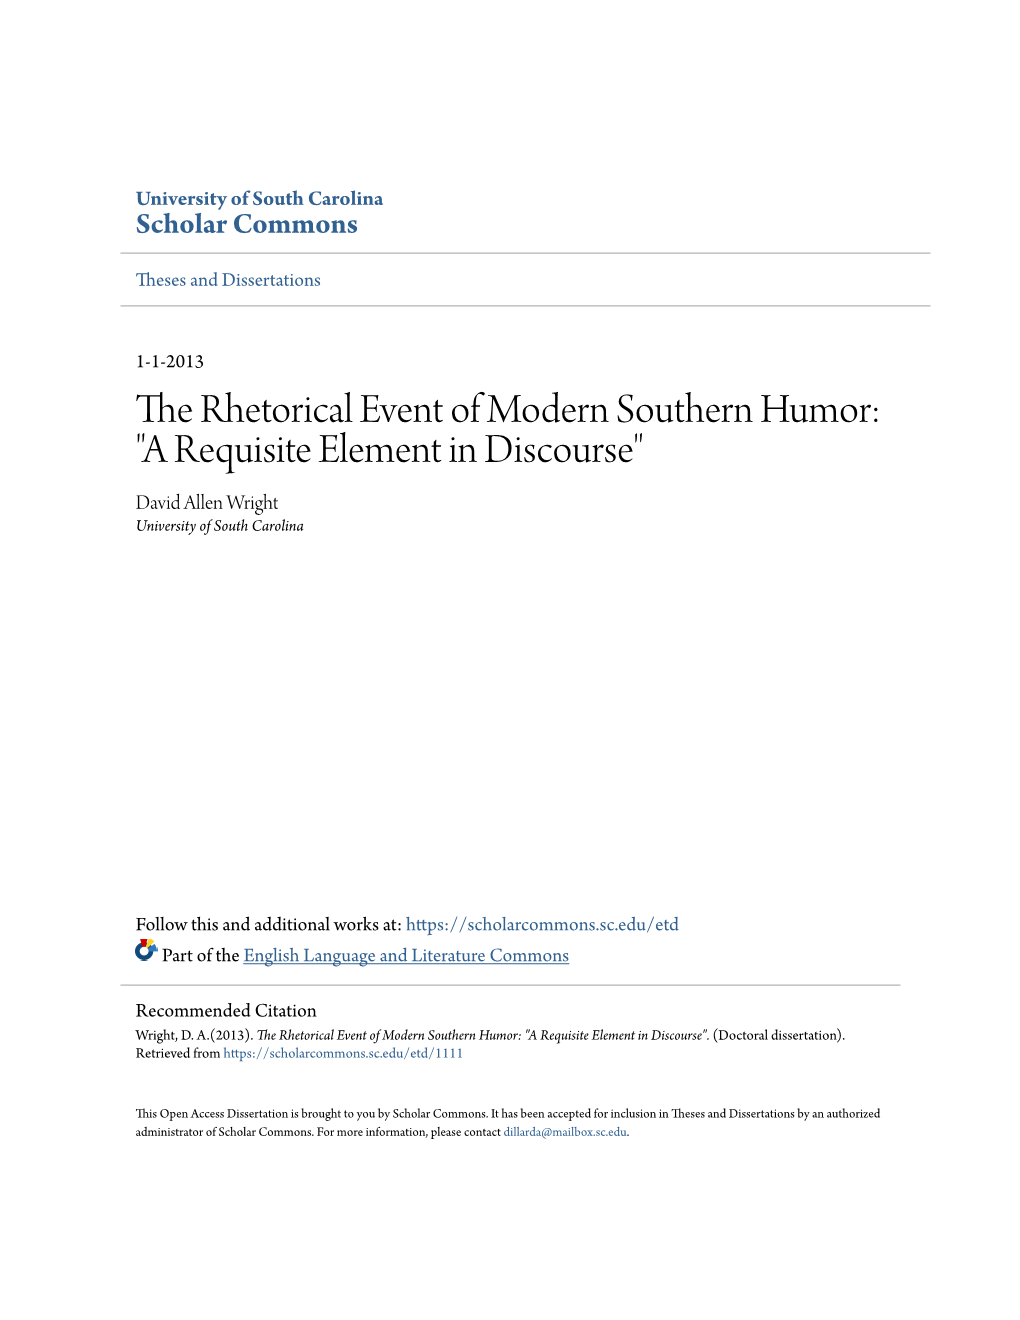 The Rhetorical Event of Modern Southern Humor: "A Requisite Element in Discourse" David Allen Wright University of South Carolina